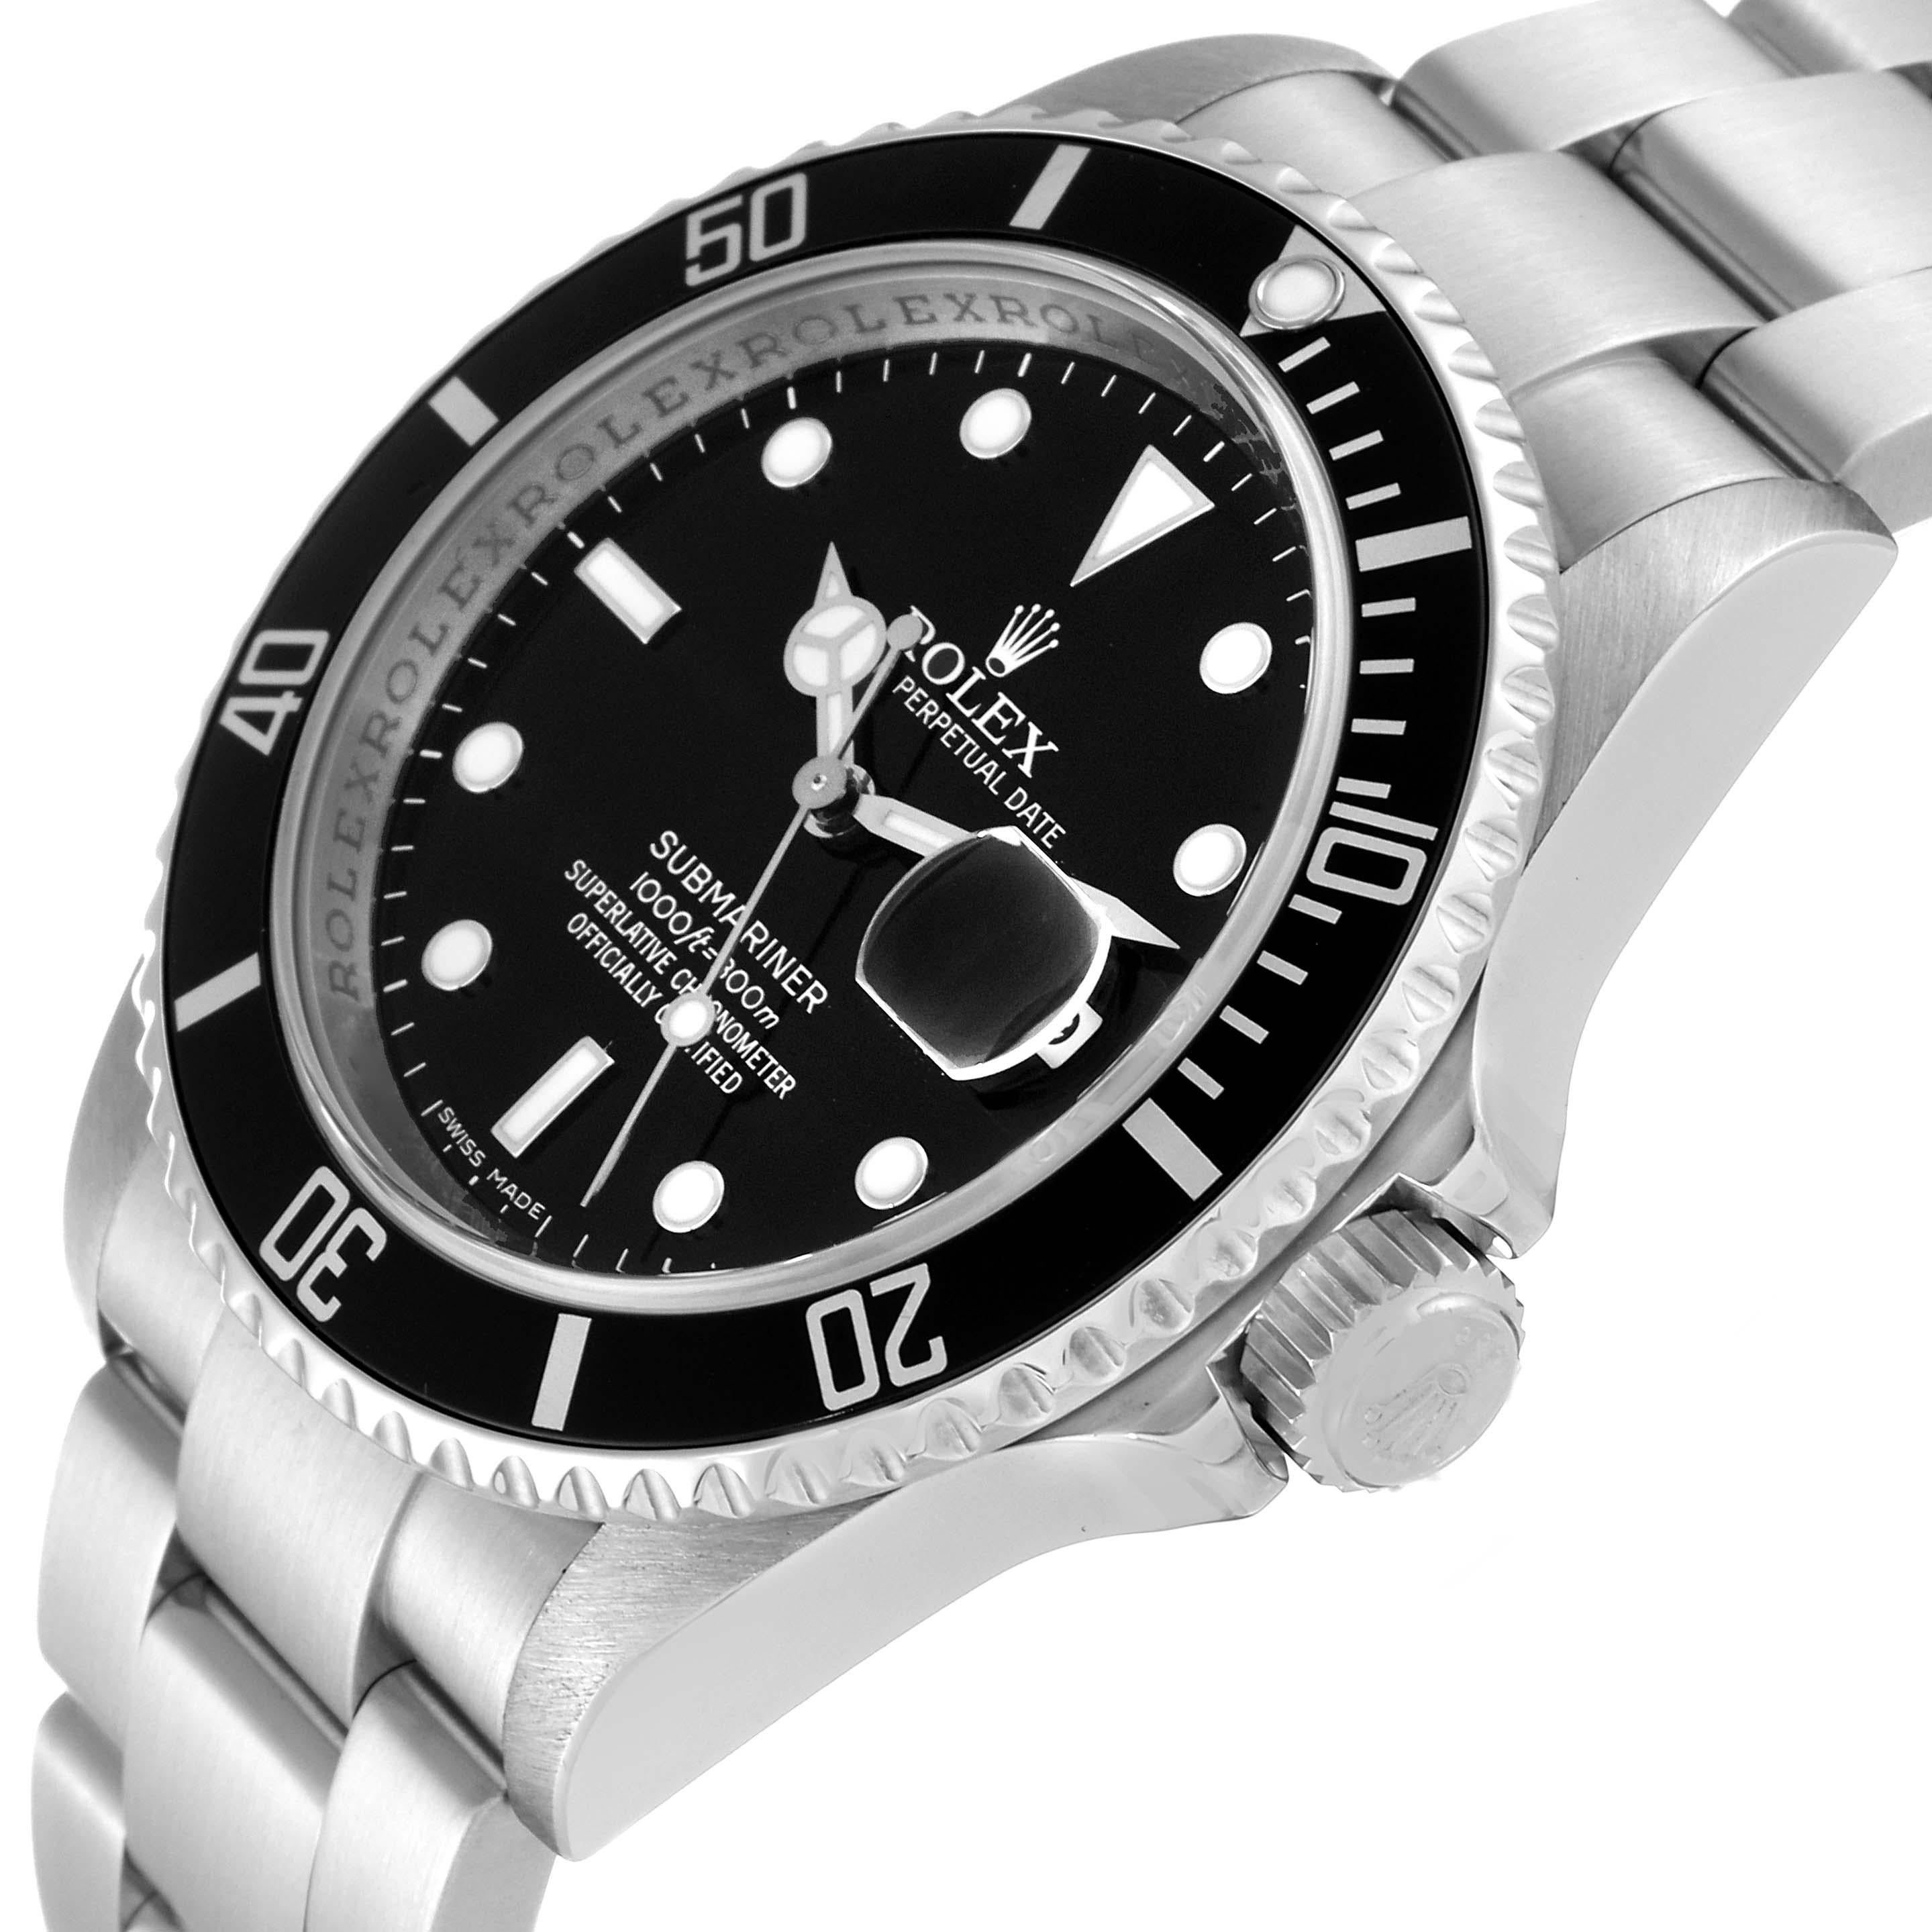 Rolex Submariner Date Black Dial Steel Mens Watch 16610 In Excellent Condition For Sale In Atlanta, GA